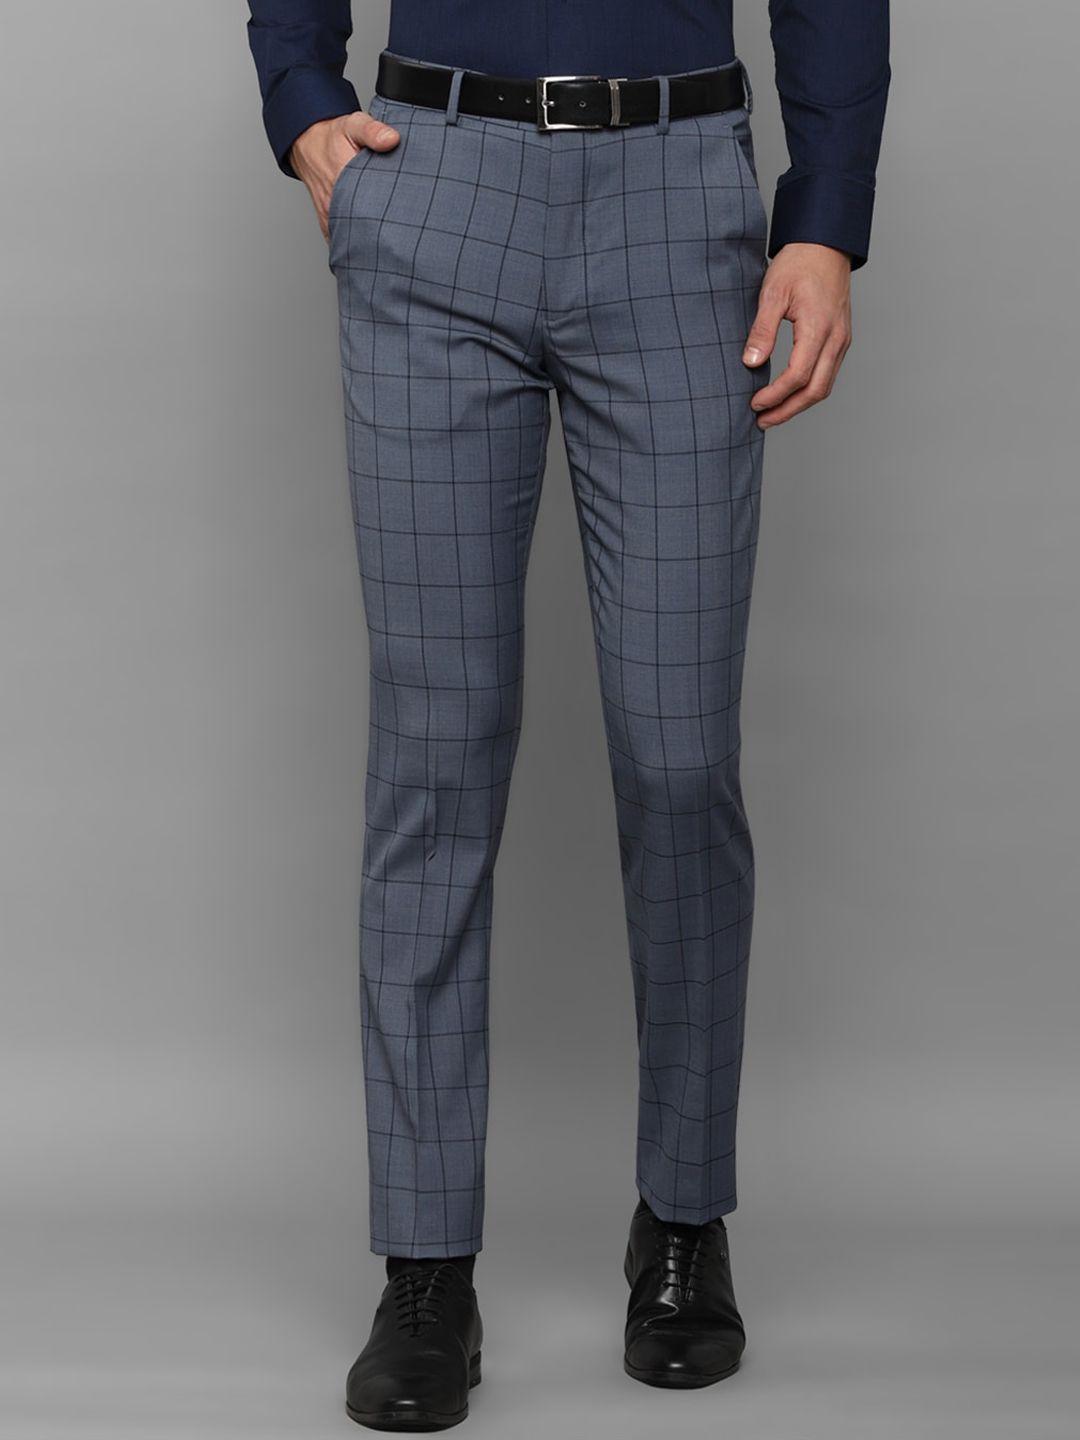 louis philippe men grey checked slim fit trousers